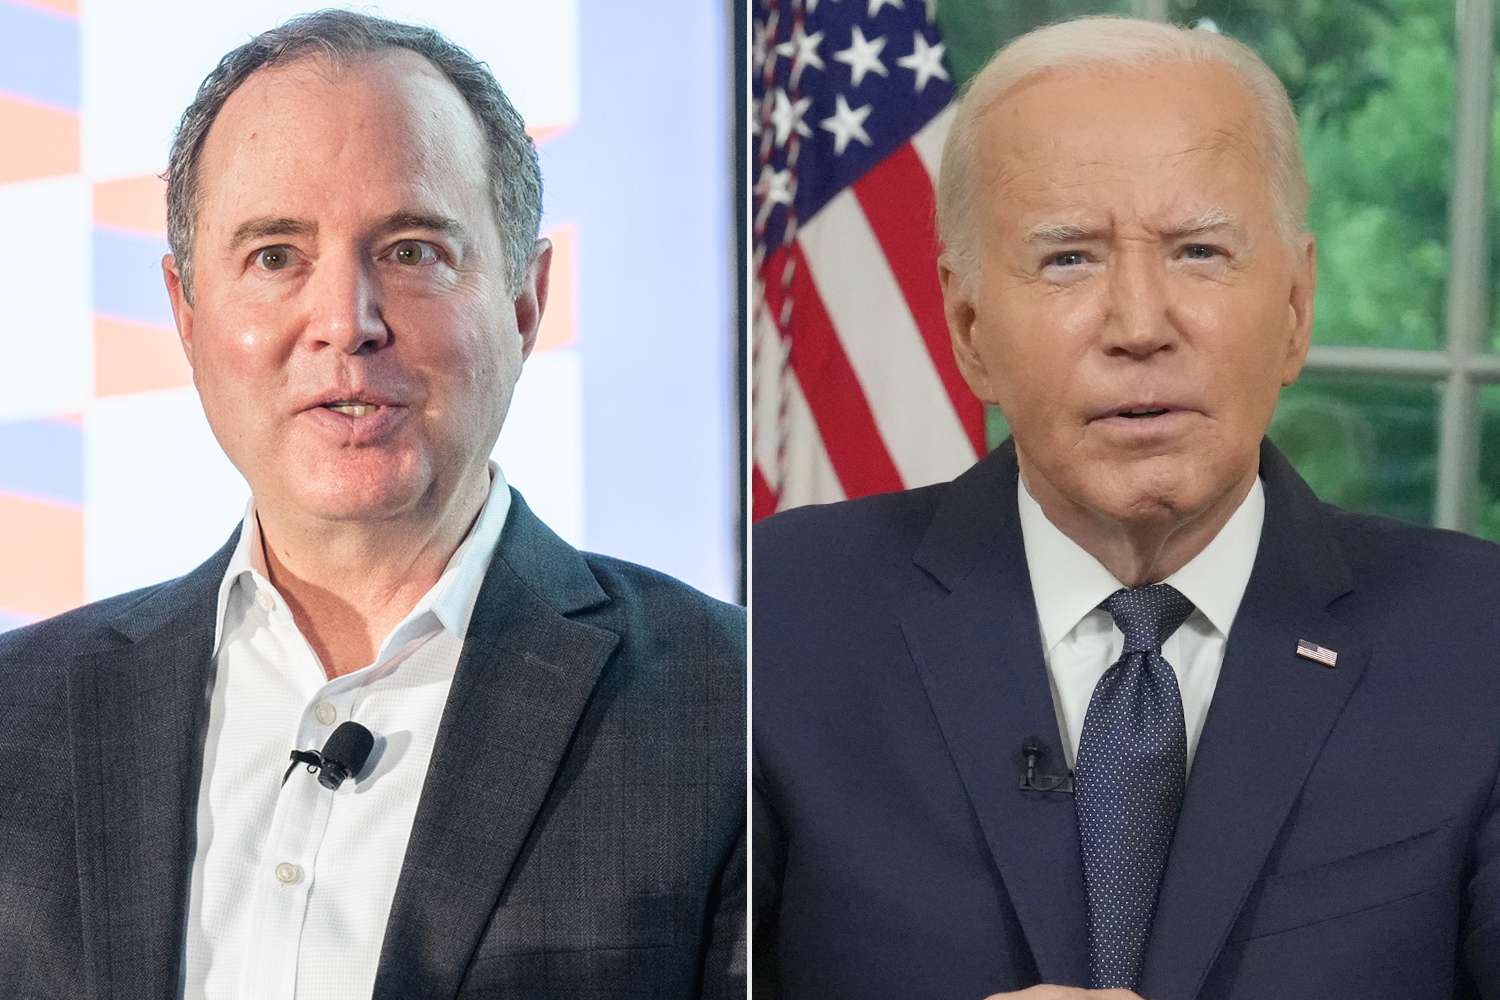 Why Powerful Democrat Adam Schiff Is Joining the Call for Biden to Step Aside: ‘Our Nation Is at a Crossroads’